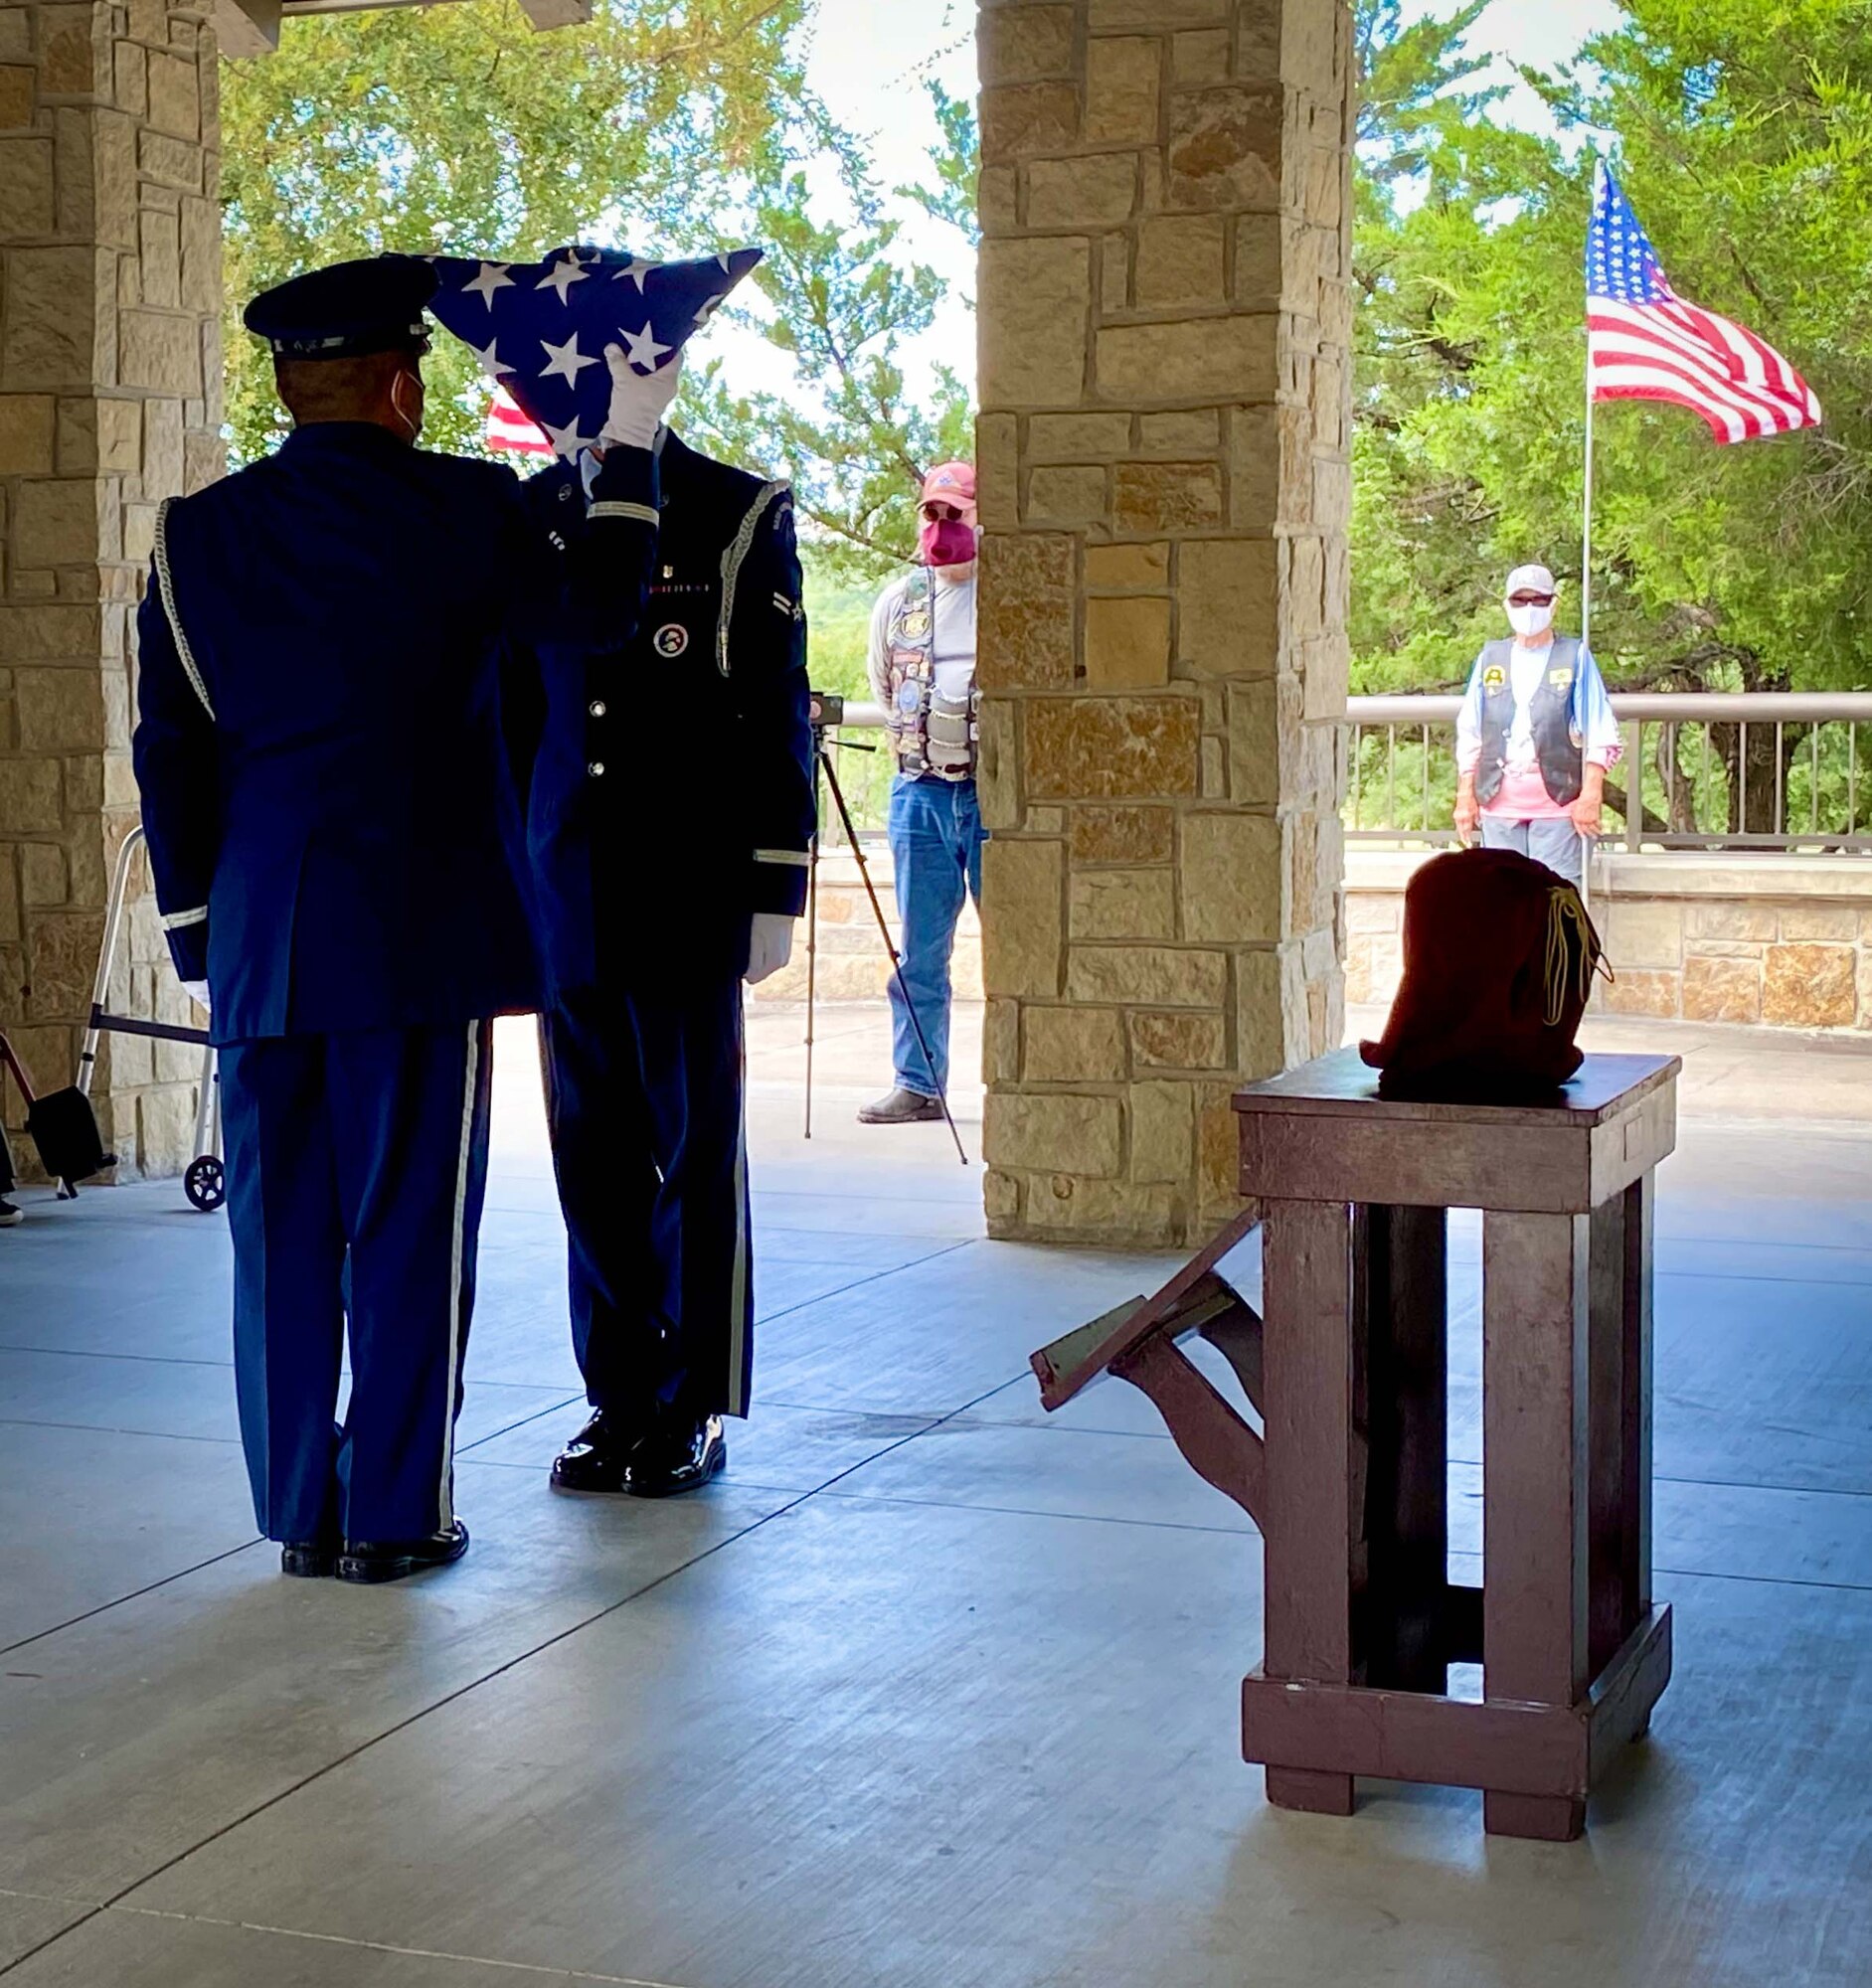 Airmen from the Dyess Air Force Base Honor Guard prepare a memorial flag for POW and F-16 program founder, Brigadier General Lyle Cameron's wife on August 7 during a funeral ceremony at Dallas Fort Worth National Cemetery. Before his contributions to the F-16 program, Brig. Gen. Cameron was held captive for 32 months at a prisoner of war camp in Mukden (Shenyang), China. (U.S. Air Force photo by Capt. Jessica Gross)